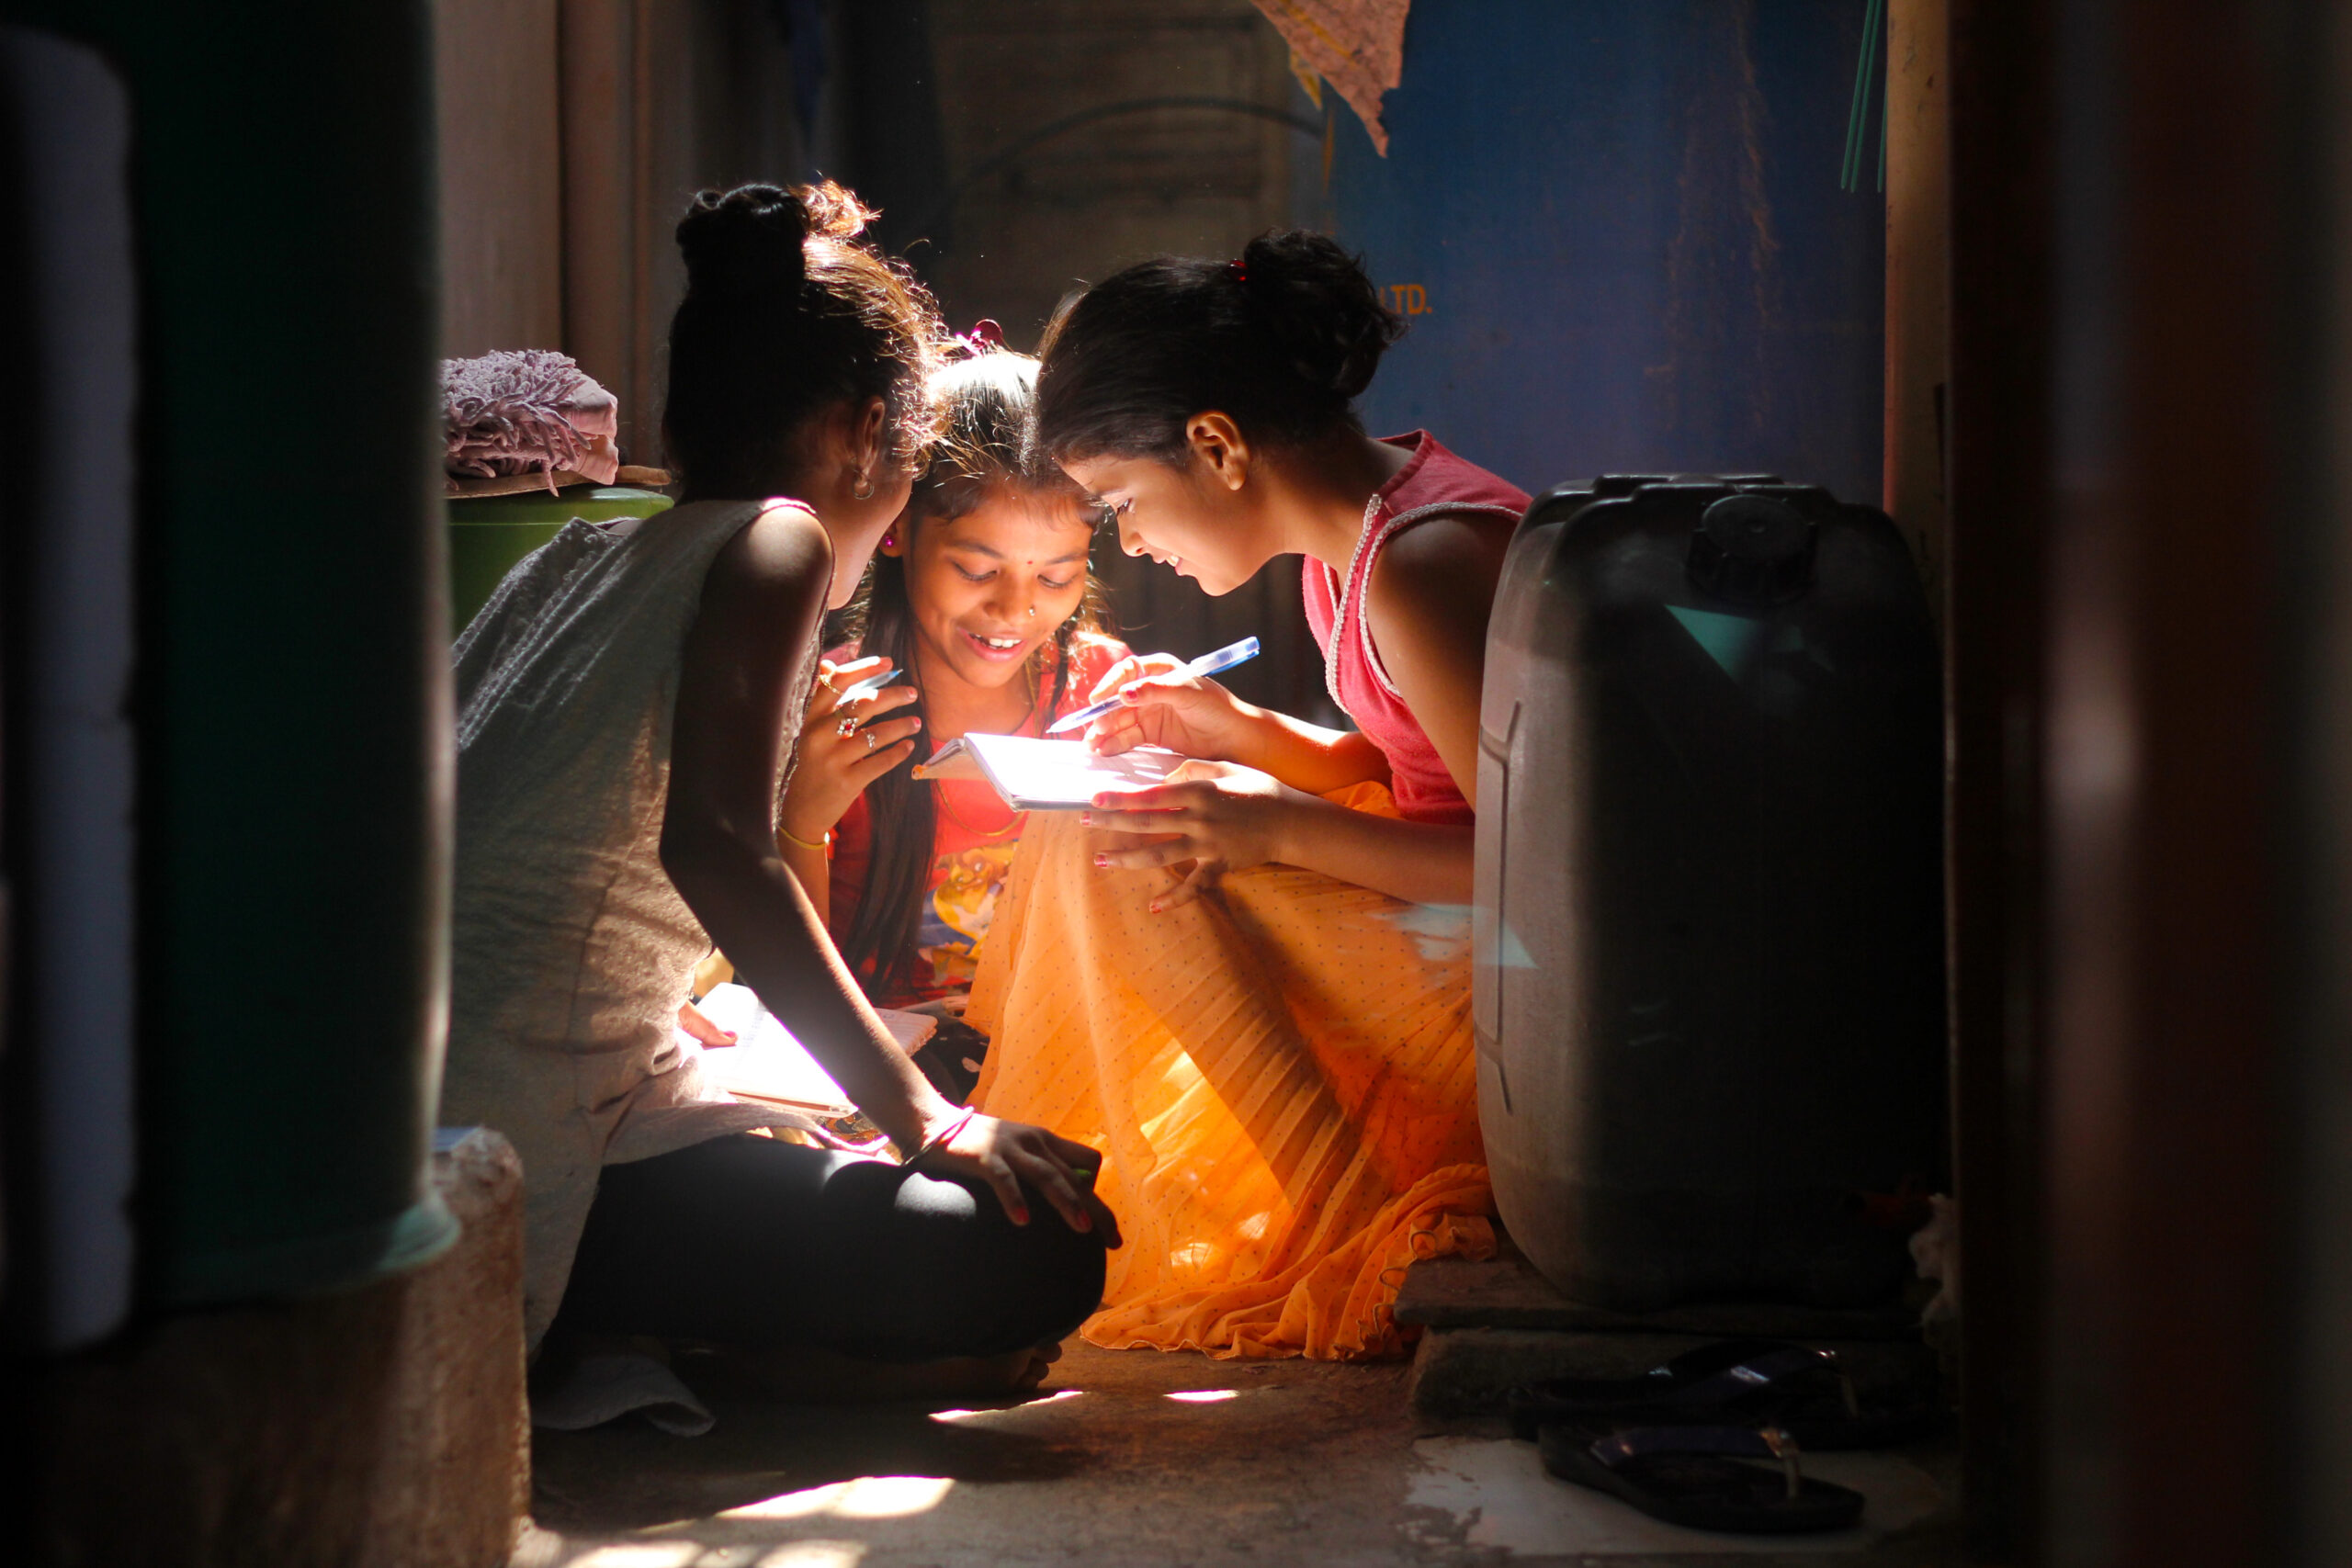 Indian girls sitting together on the floor writing